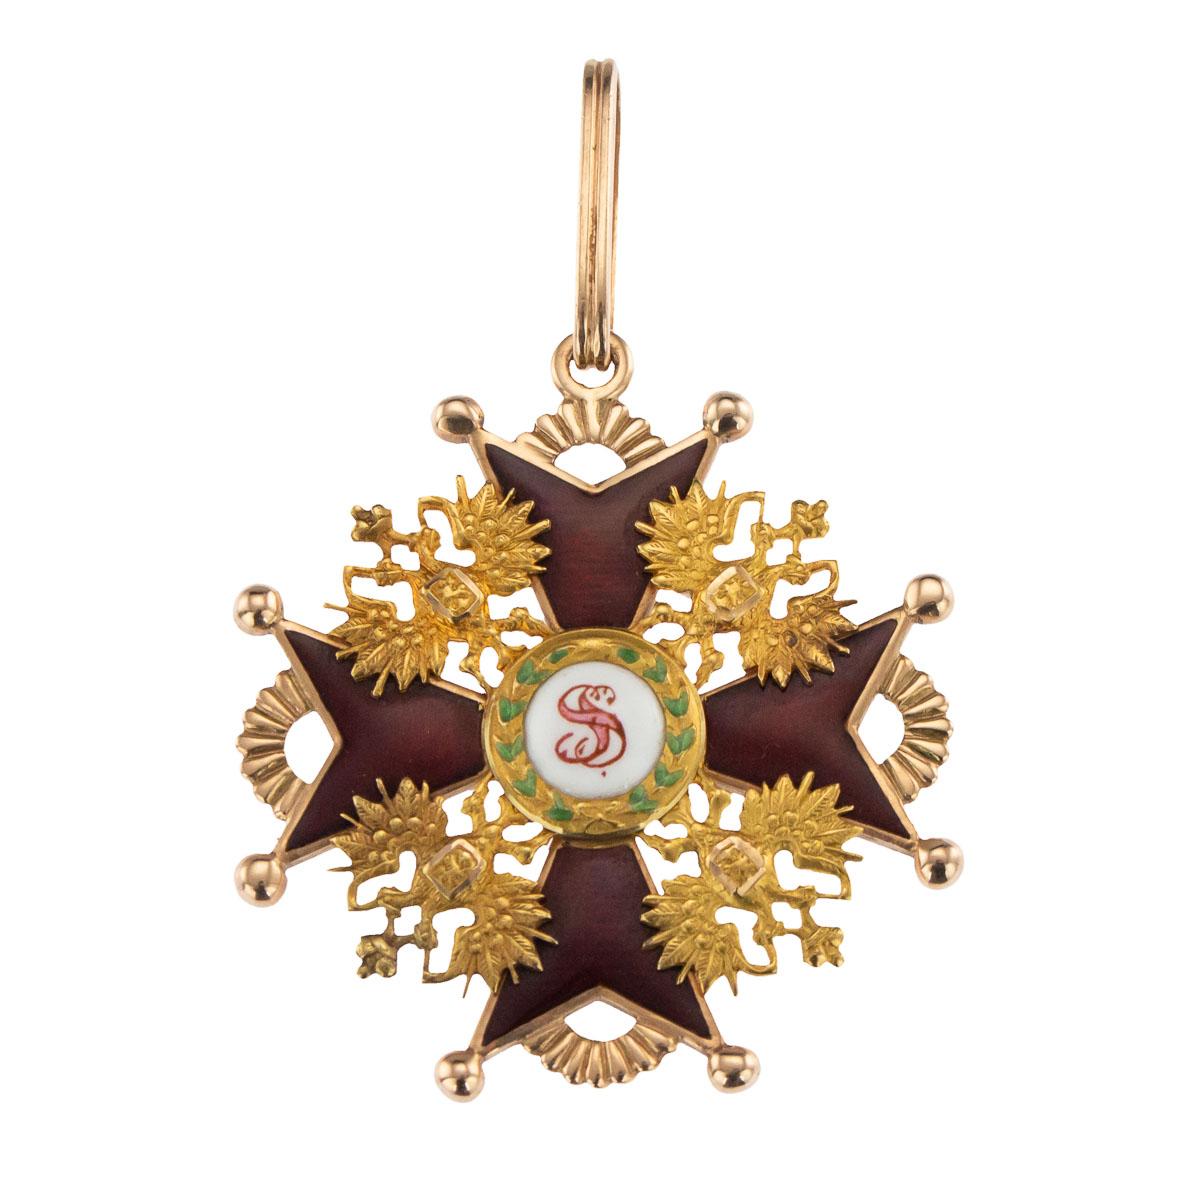 Antique 20th century Russian Imperial Order of St. Stanislaus 2nd Class (Civil) badge / medal, the cross covered in translucent red enamel. The badge is Hallmarked Russian Imperial Gold 56 (585 standard), St. Petersburg, year 1908-1917, work